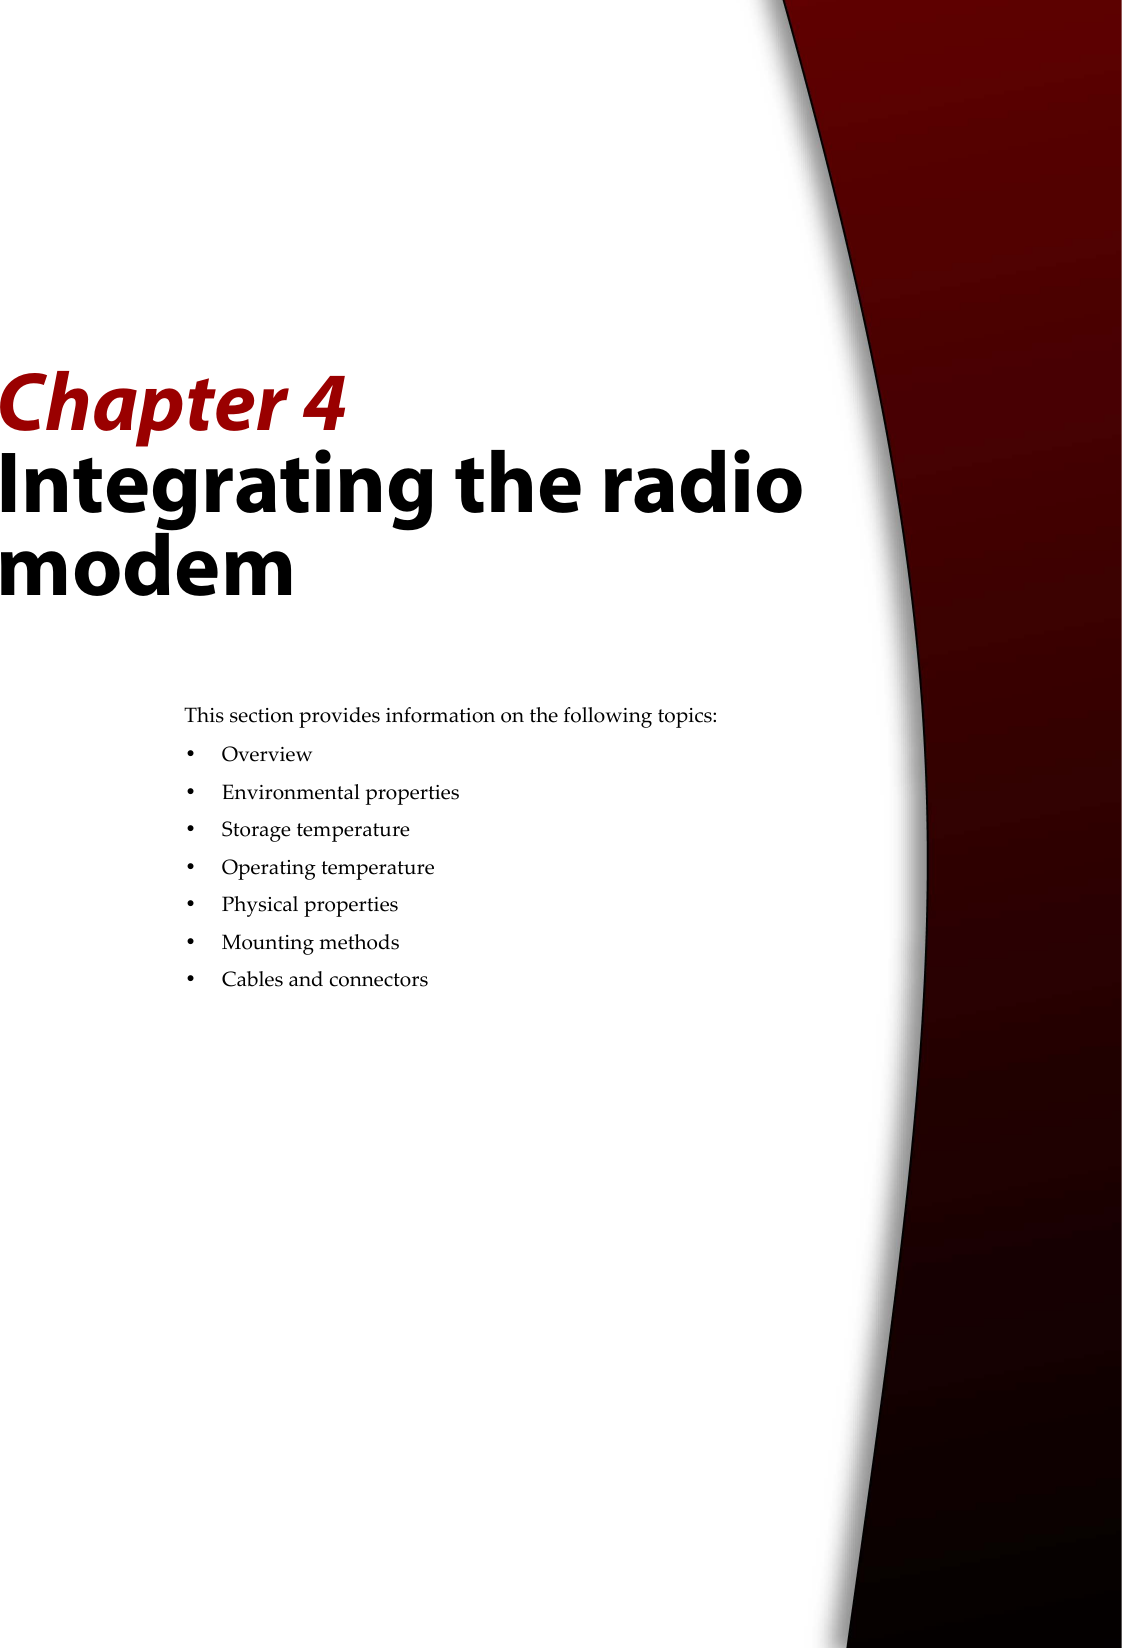 Chapter 4Integrating the radio modemThis section provides information on the following topics:•Overview•Environmental properties•Storage temperature•Operating temperature•Physical properties•Mounting methods•Cables and connectors